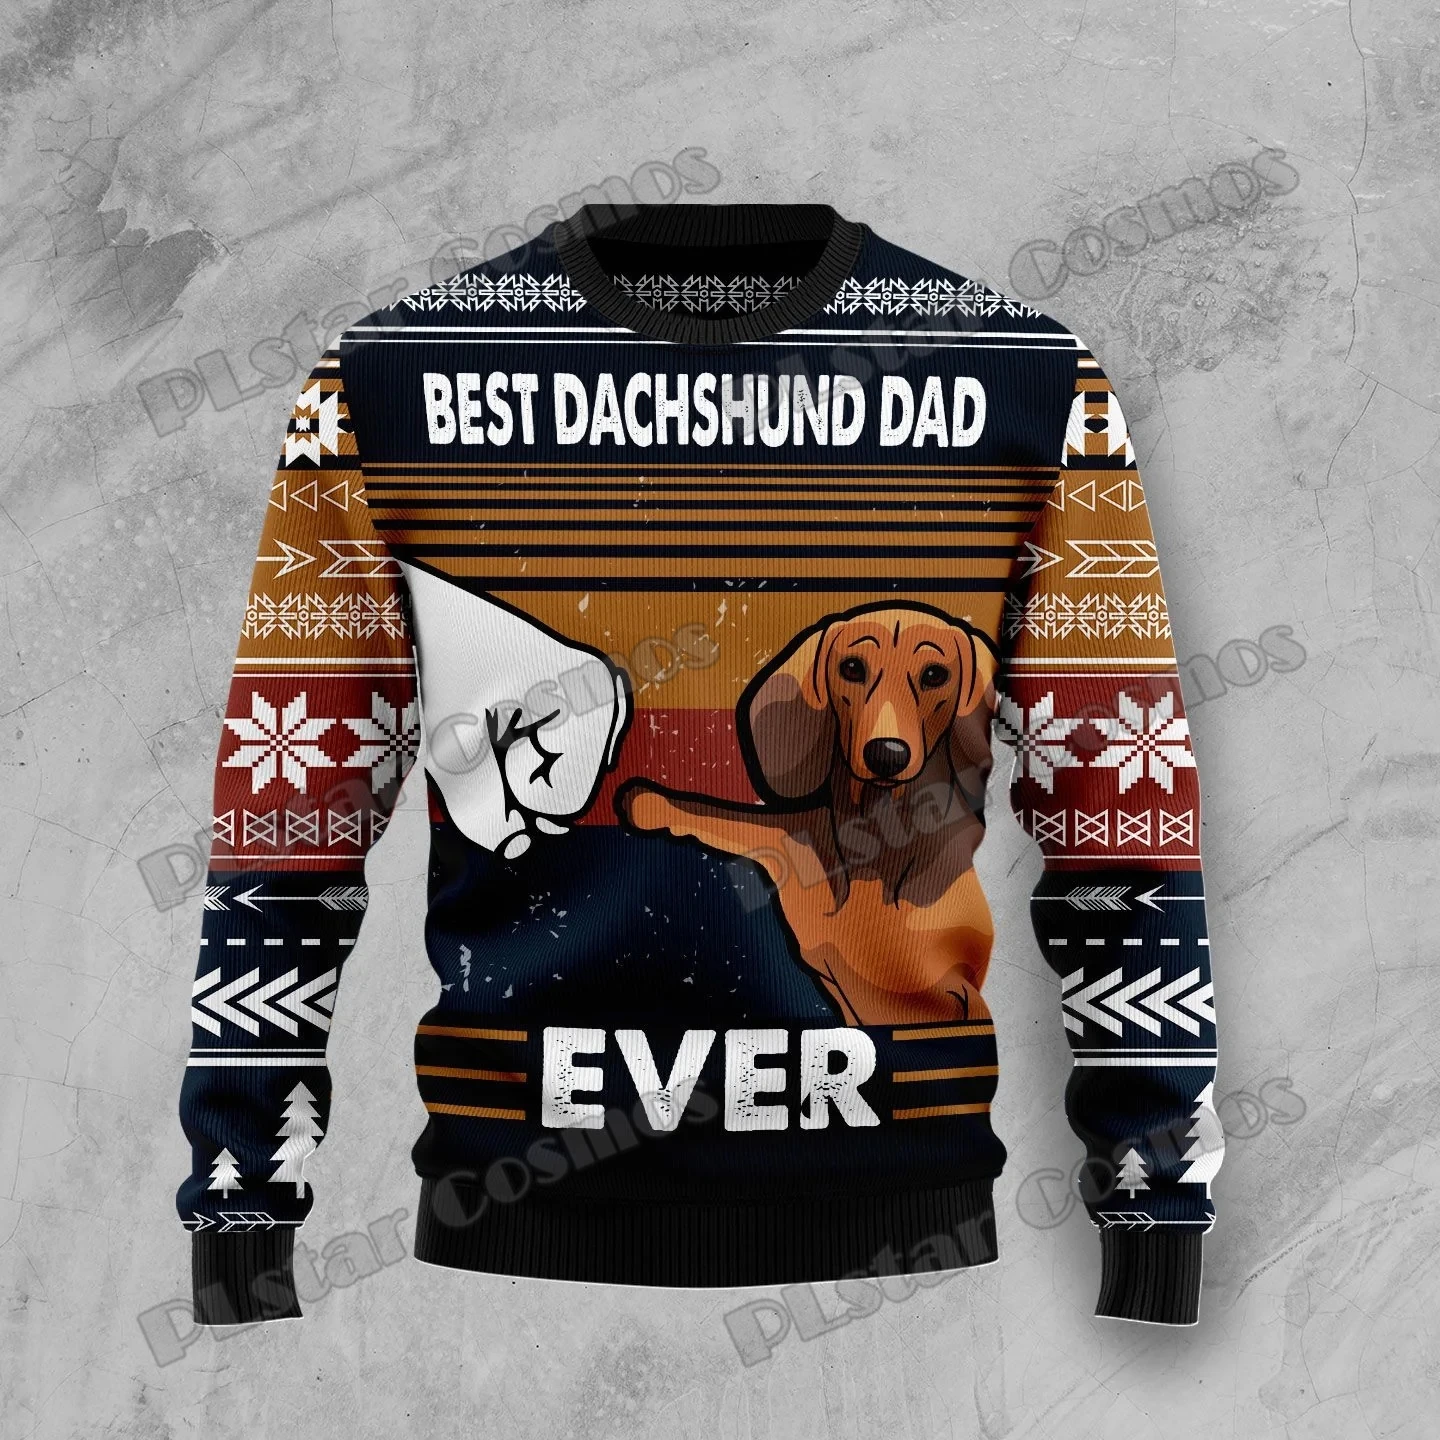 PLstar Cosmos Best Dachshund Dad Ever 3D Printed Fashion Ugly Christmas Sweater Winter Unisex Casual Knitwear Pullover MYY26